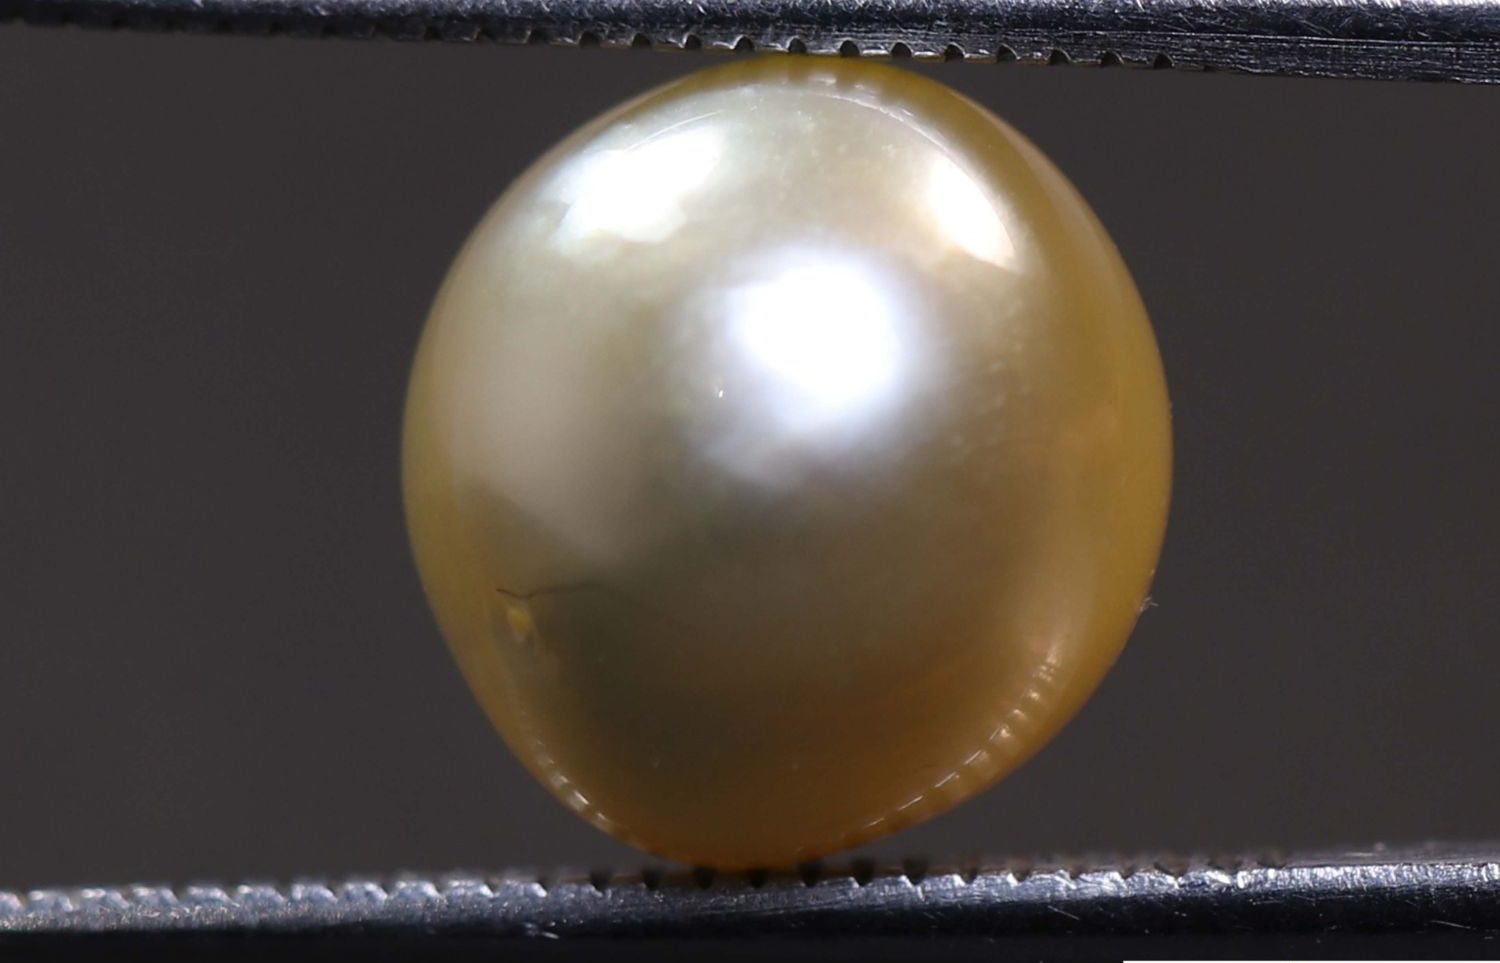 PEARL 6.07 Ct.